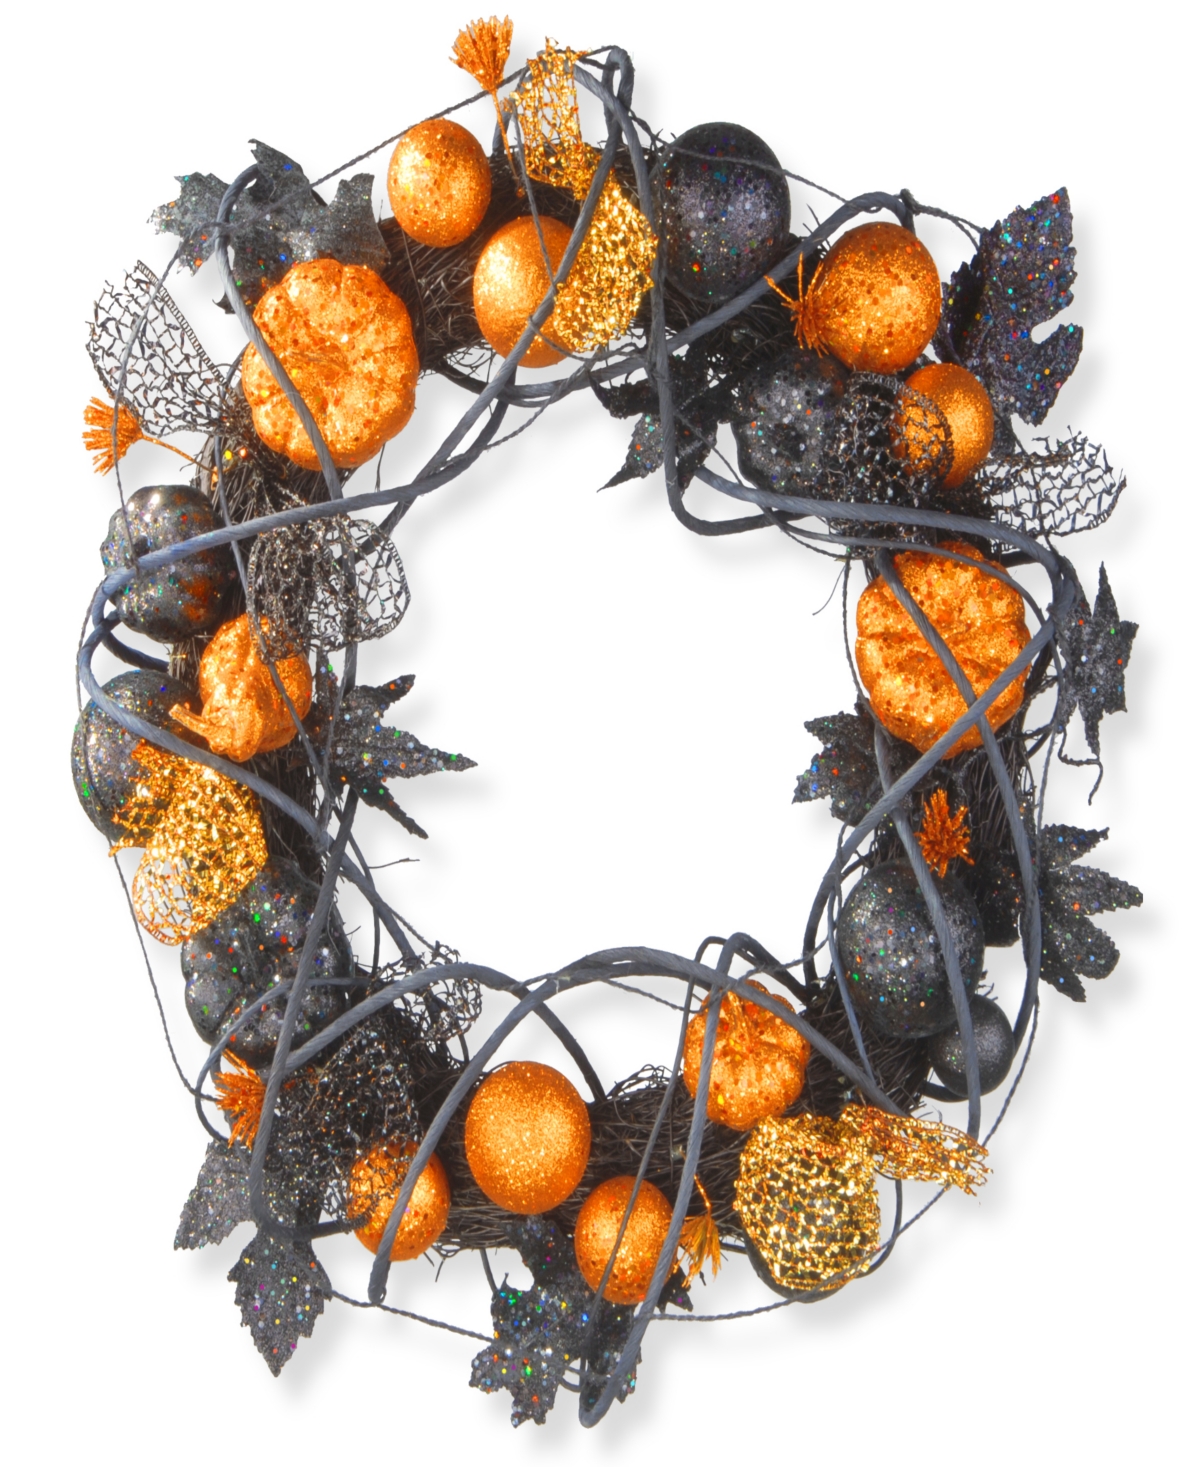 20" Artificial Halloween Wreath, Decorated with Multicolored Pumpkins, Gourds, Ball Ornaments, Ribbons, Vines, Assorted Leaves -